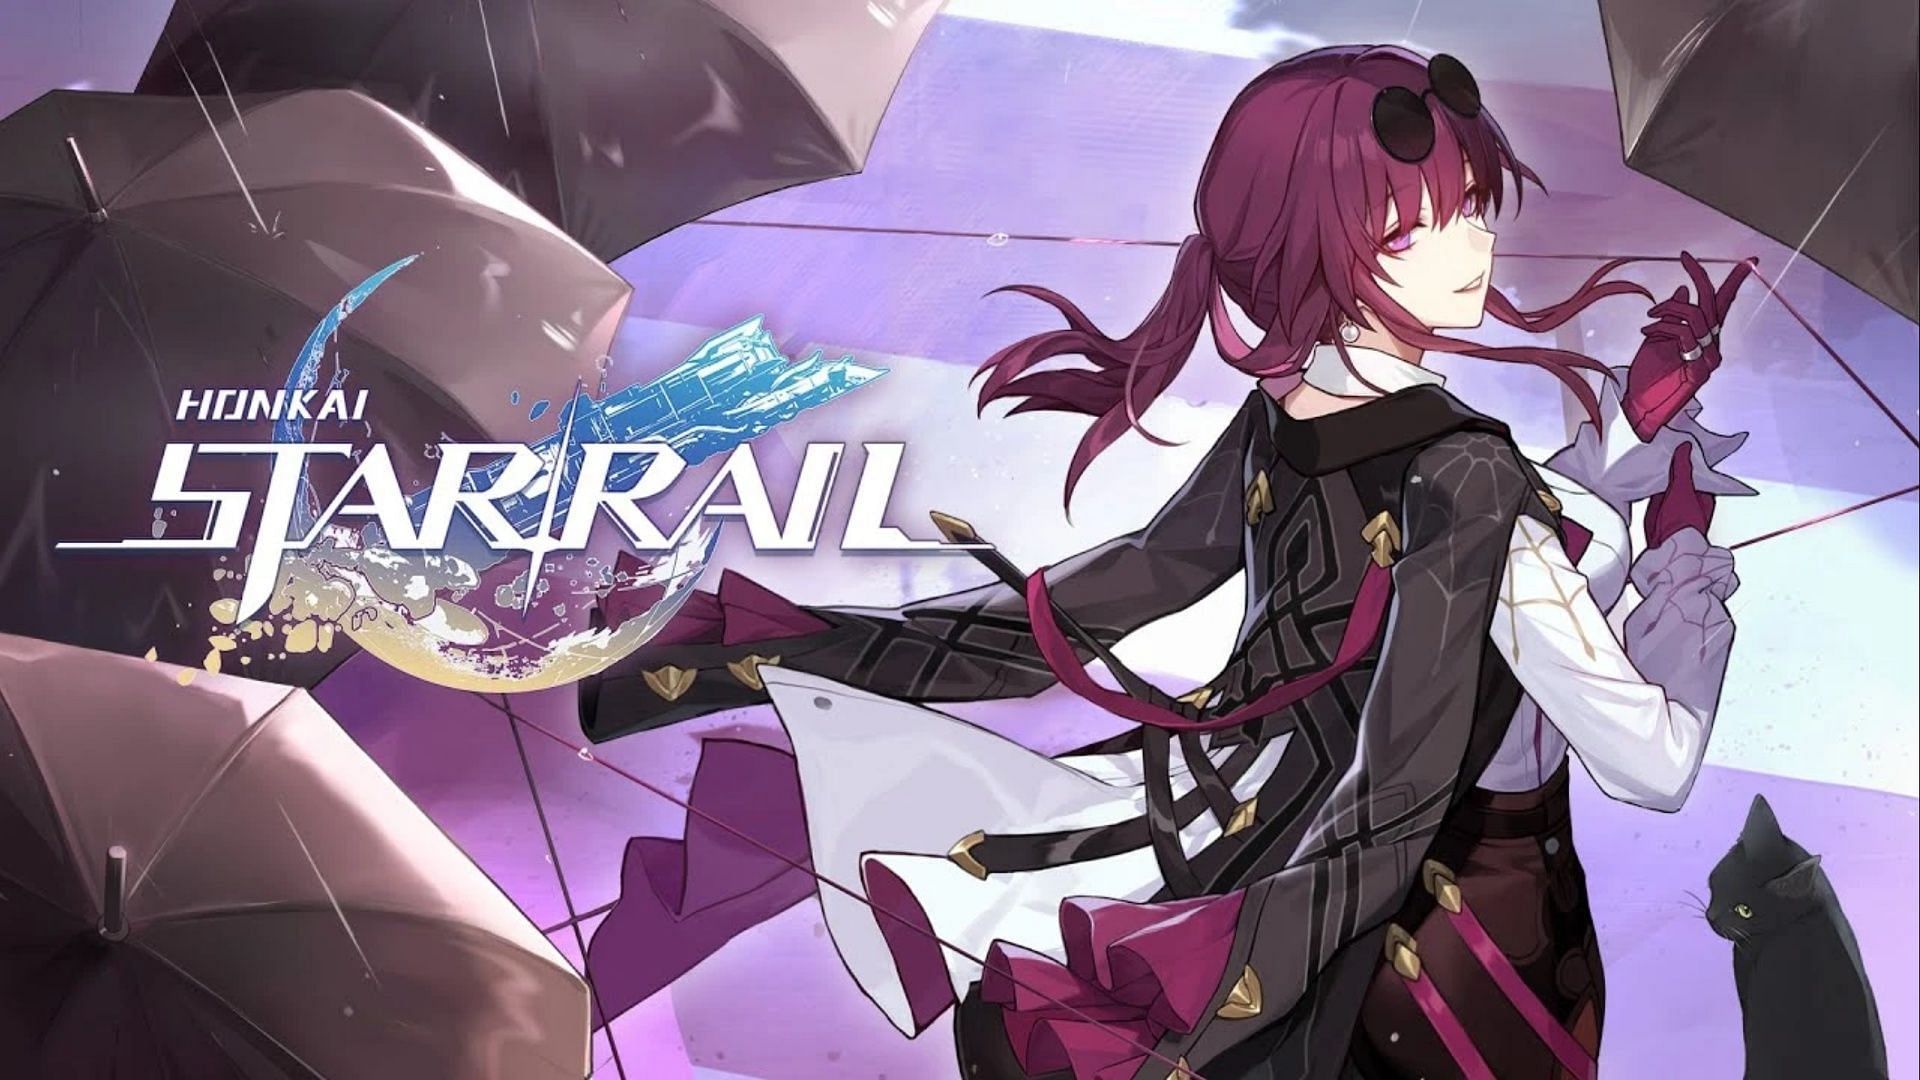 Honkai Star Rail version 1.2 update will include several important changes (Image via miHoYo)